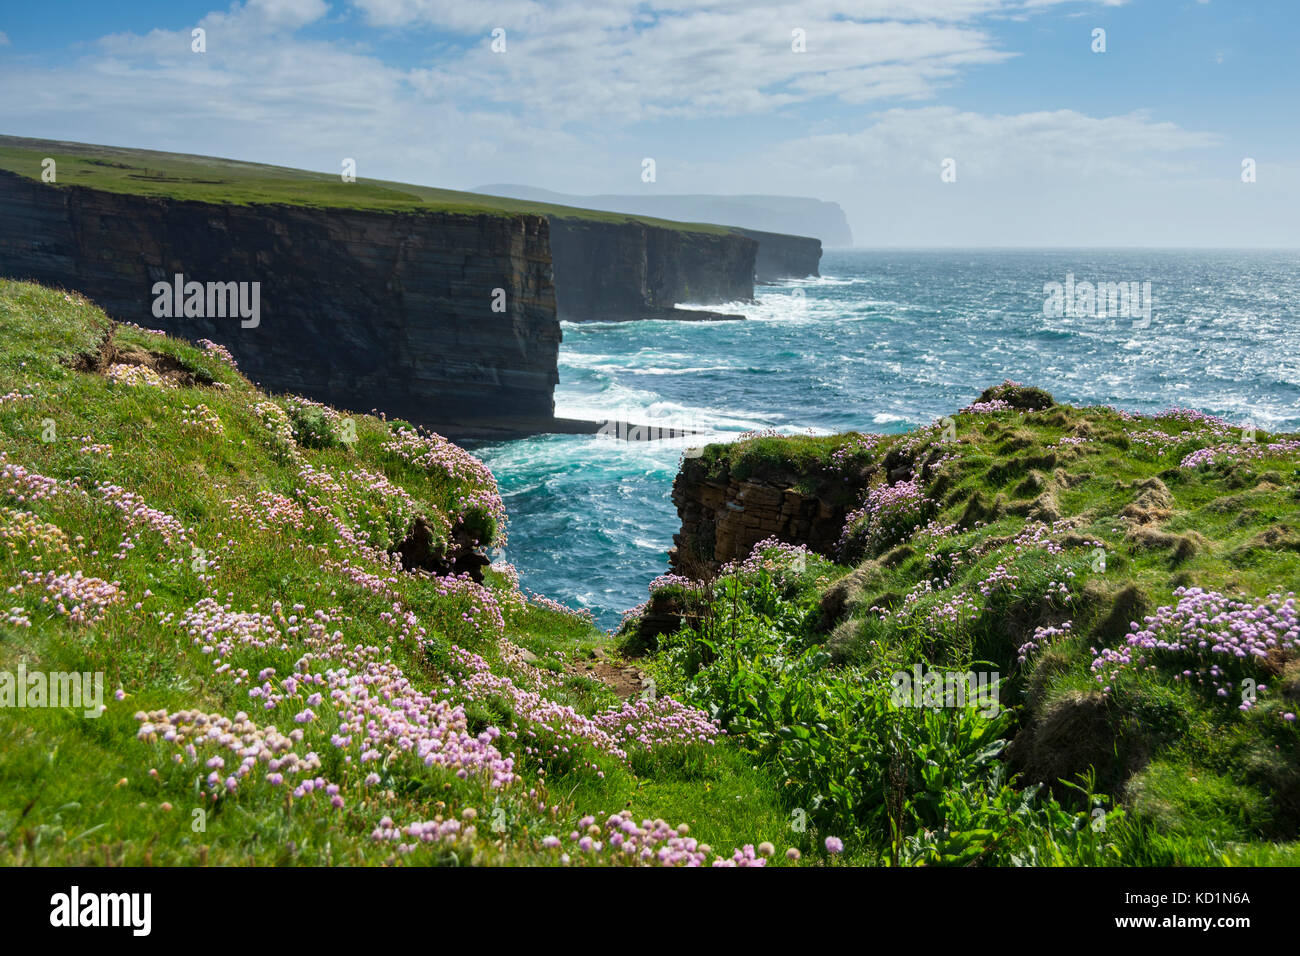 The cliffs at Yesnaby, Orkney Mainland, Scotland, UK.  The hills of Hoy in the distance. Stock Photo